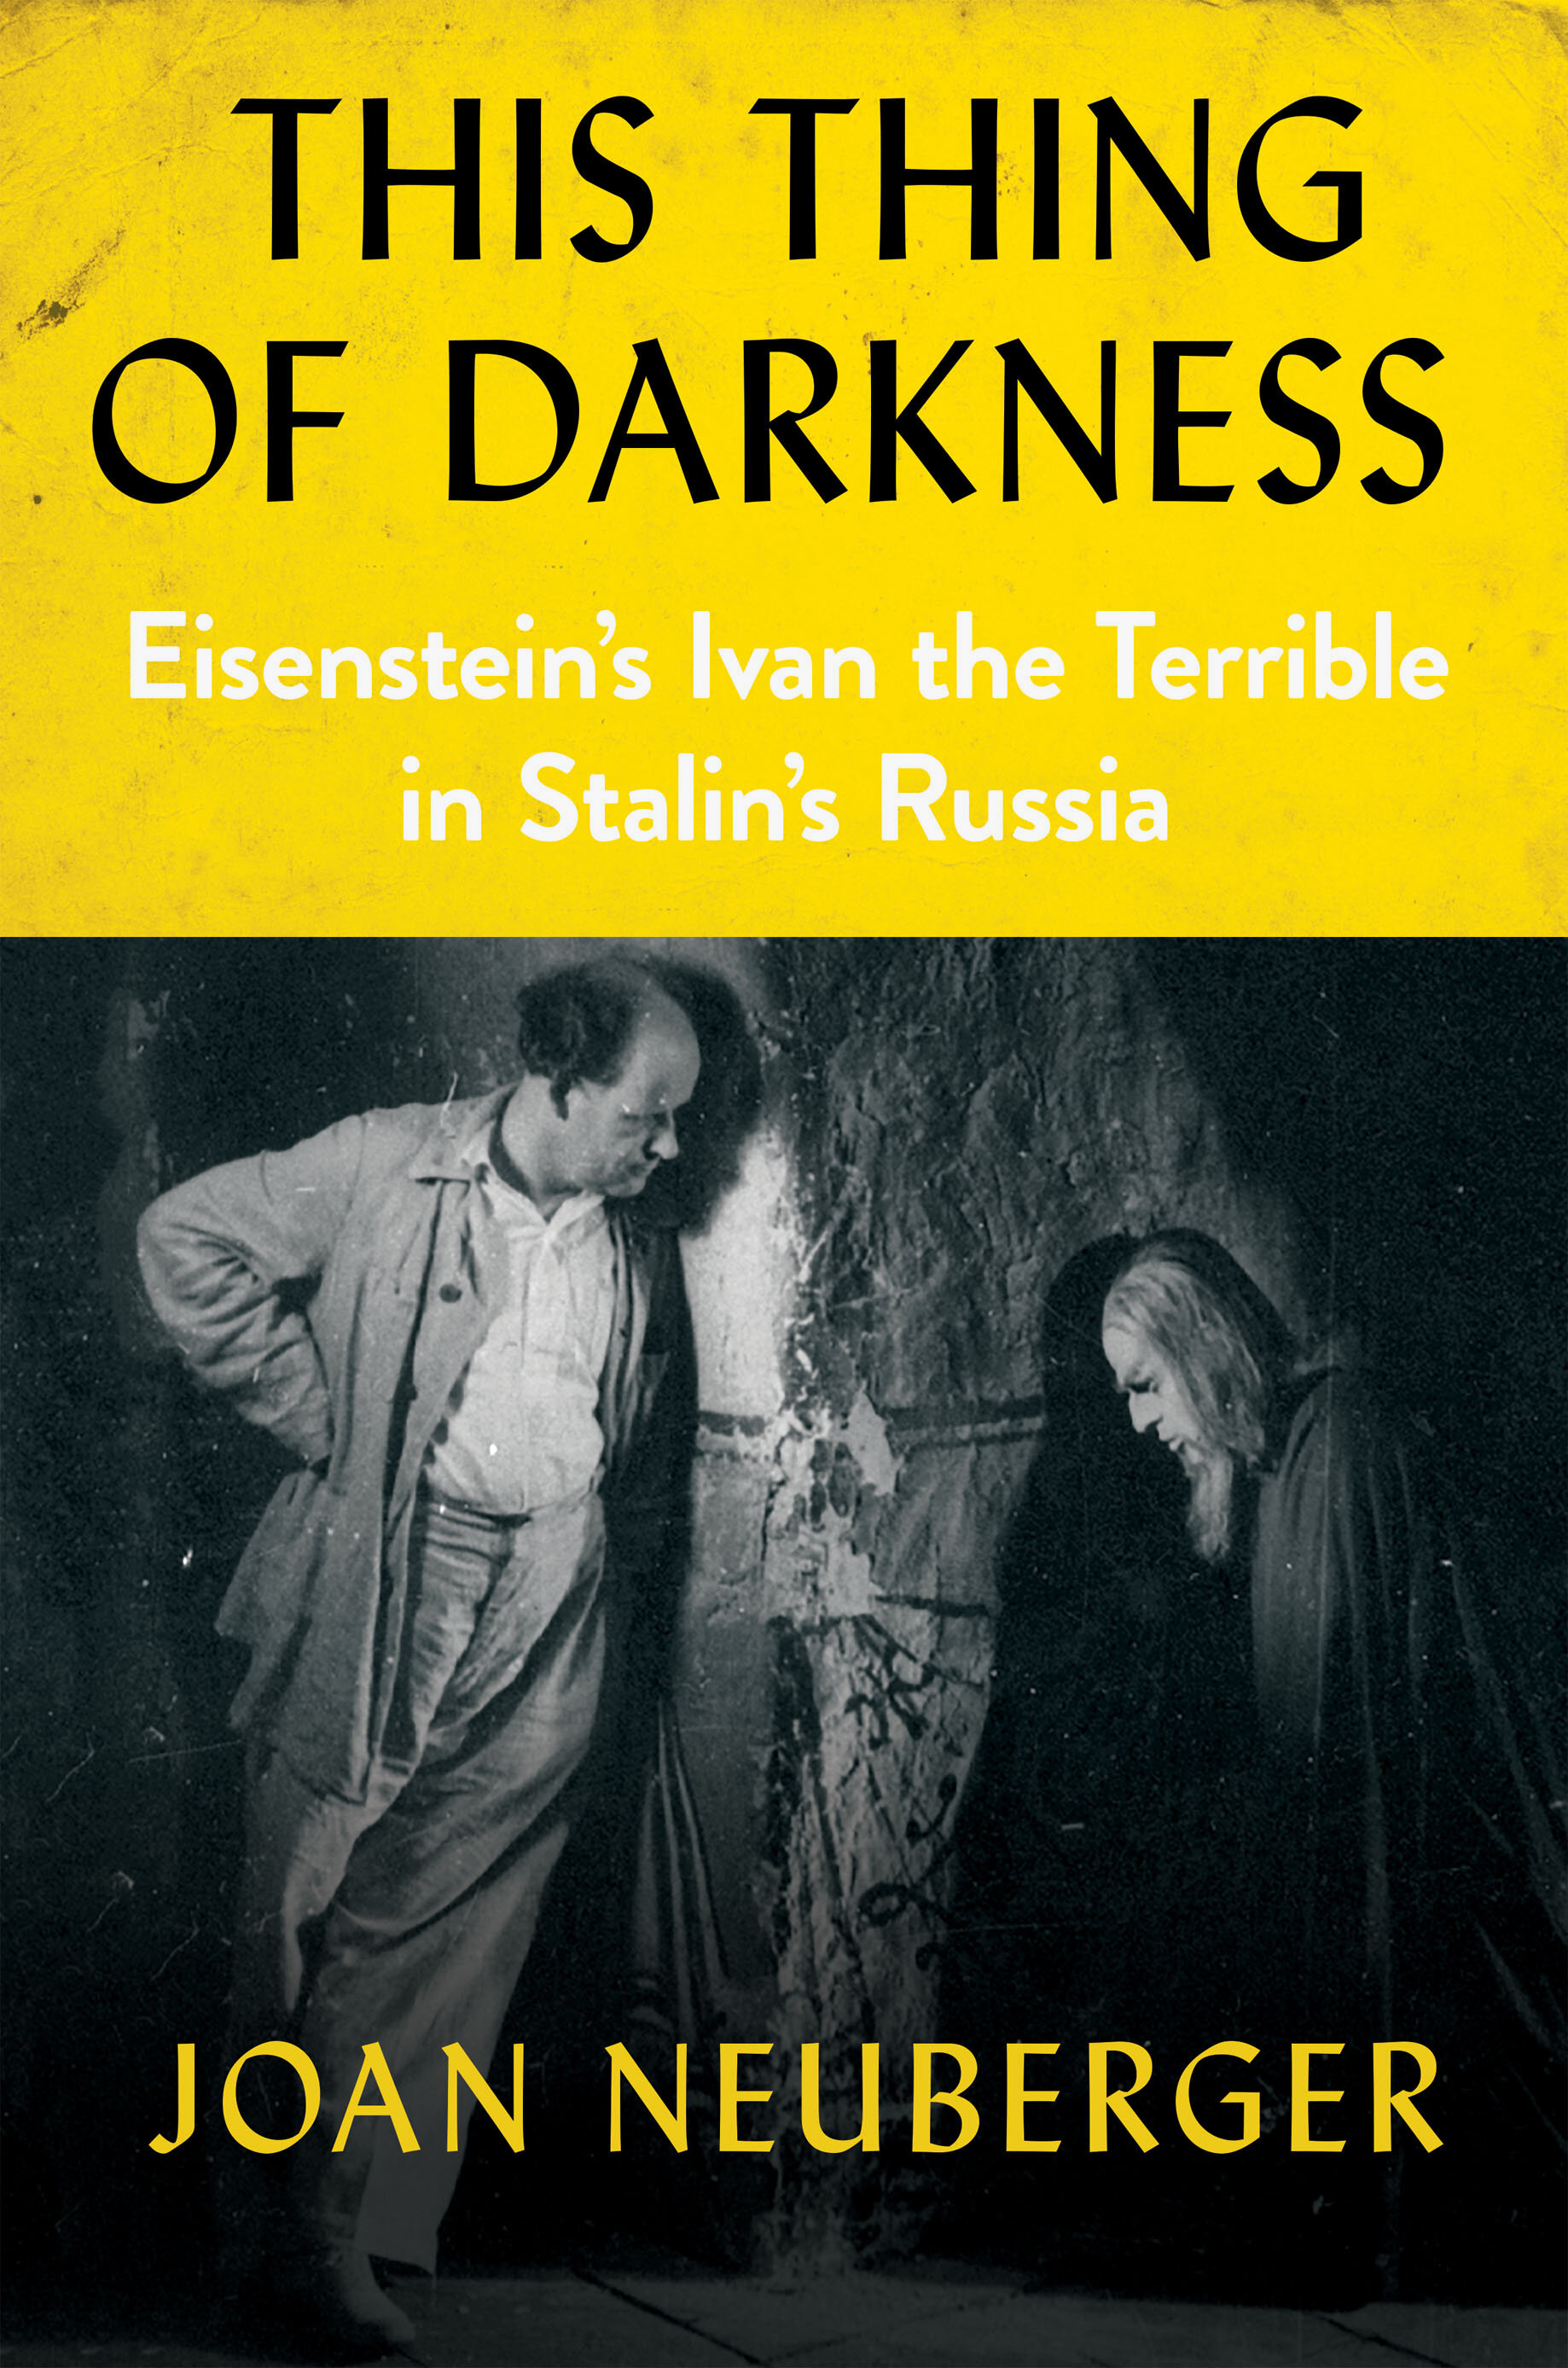 This Thing of Darkness by Joan Neuberger